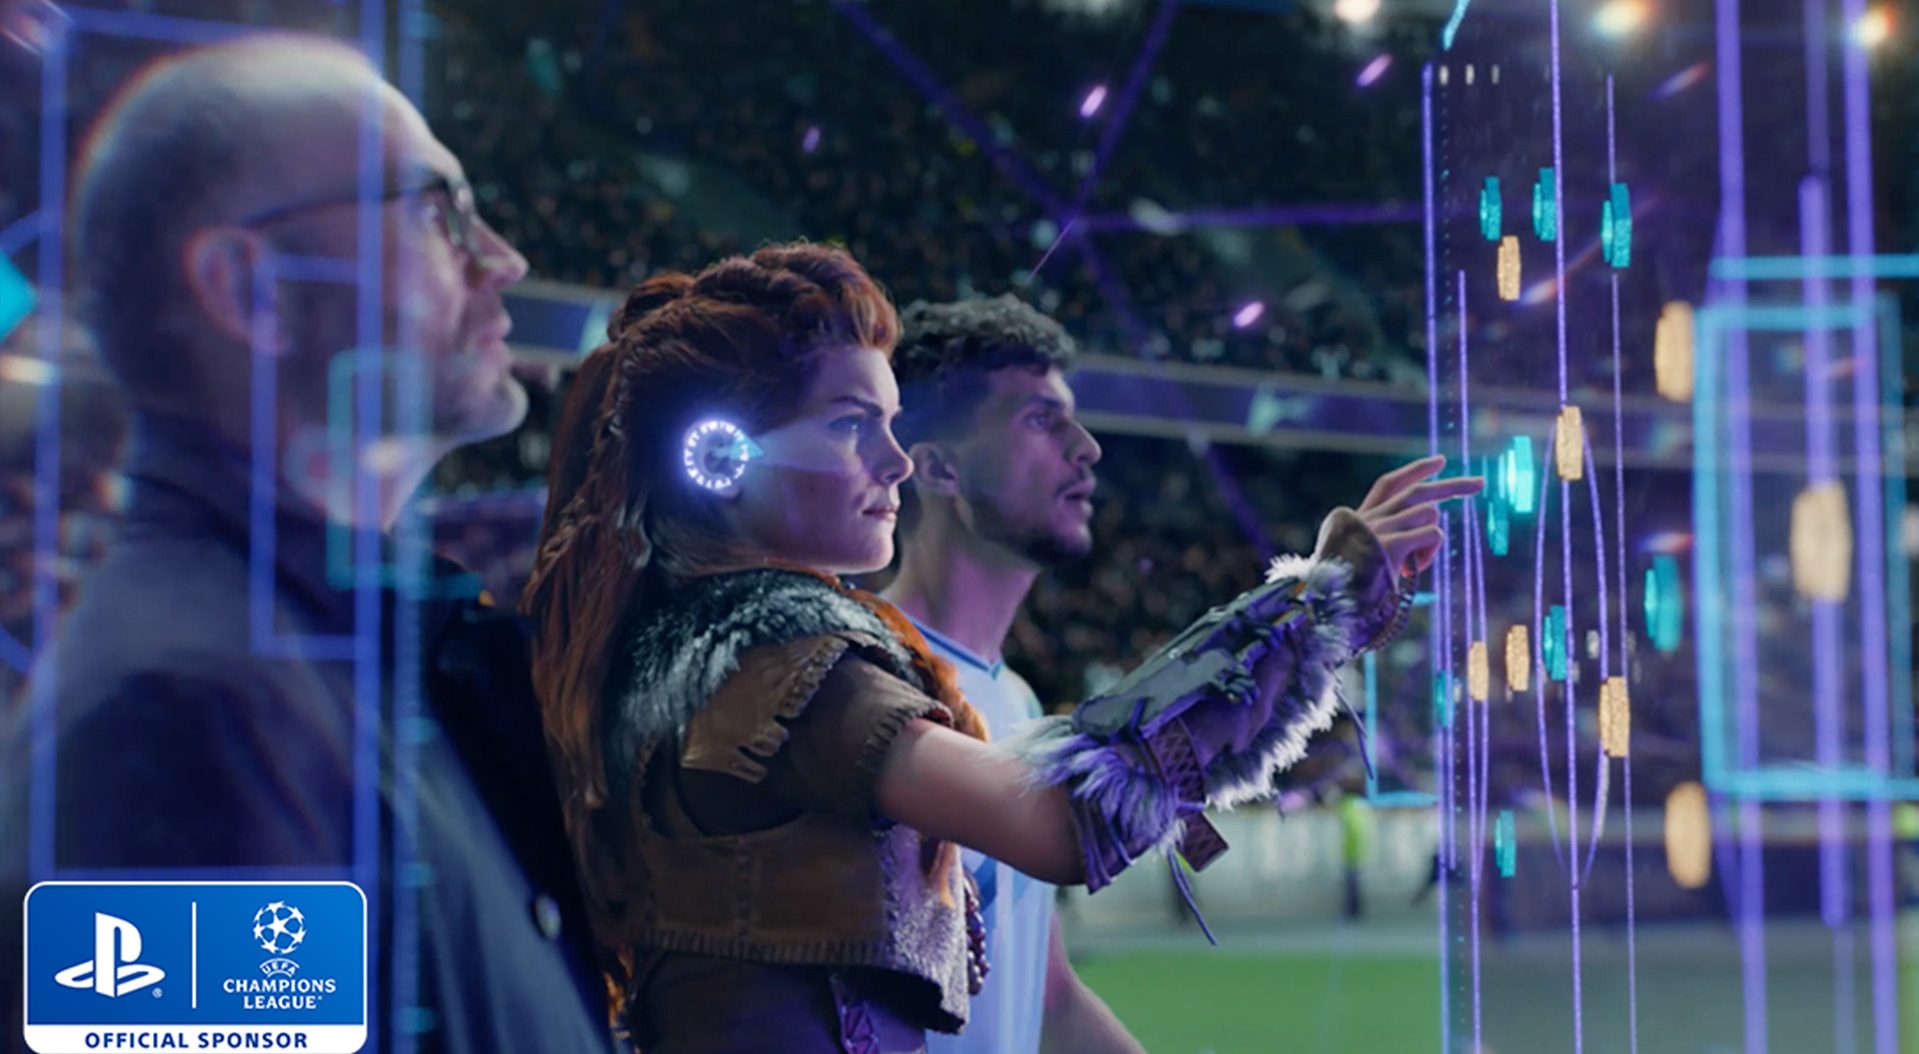 Aloy stands on the sideline of a soccer match using her focus to assist the team